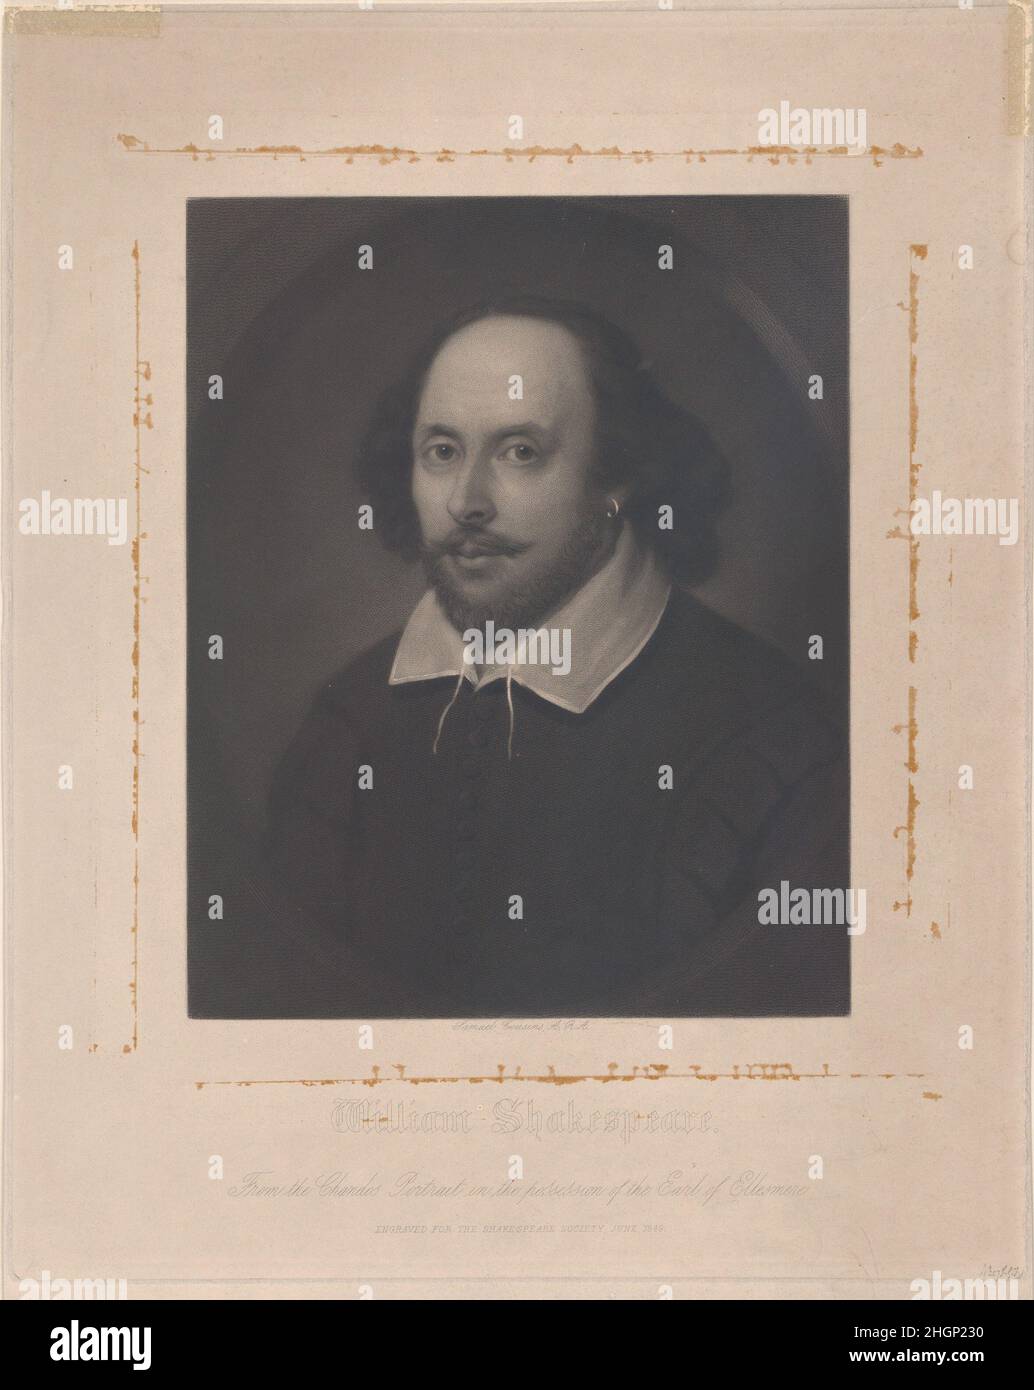 William Shakespeare 1849 Samuel Cousins Cousins based this mezzotint on the Chandos portrait of Shakespeare, a work with a good claim to be a lifetime representation. Once owned by the 3rd Duke of Chandos, the painting given to London's National Portrait Gallery in 1856 by Francis Egerton, 1st Earl of Ellesmere as the gallery’s founding portrait. The Bard wears a mustache, light beard, a dark doublet, white collar with open ties, and an earring. Most scholars today attribute the painting to John Taylor, an actor and painter-stainer who was its first recorded owner; others suggest Shakespeare's Stock Photo